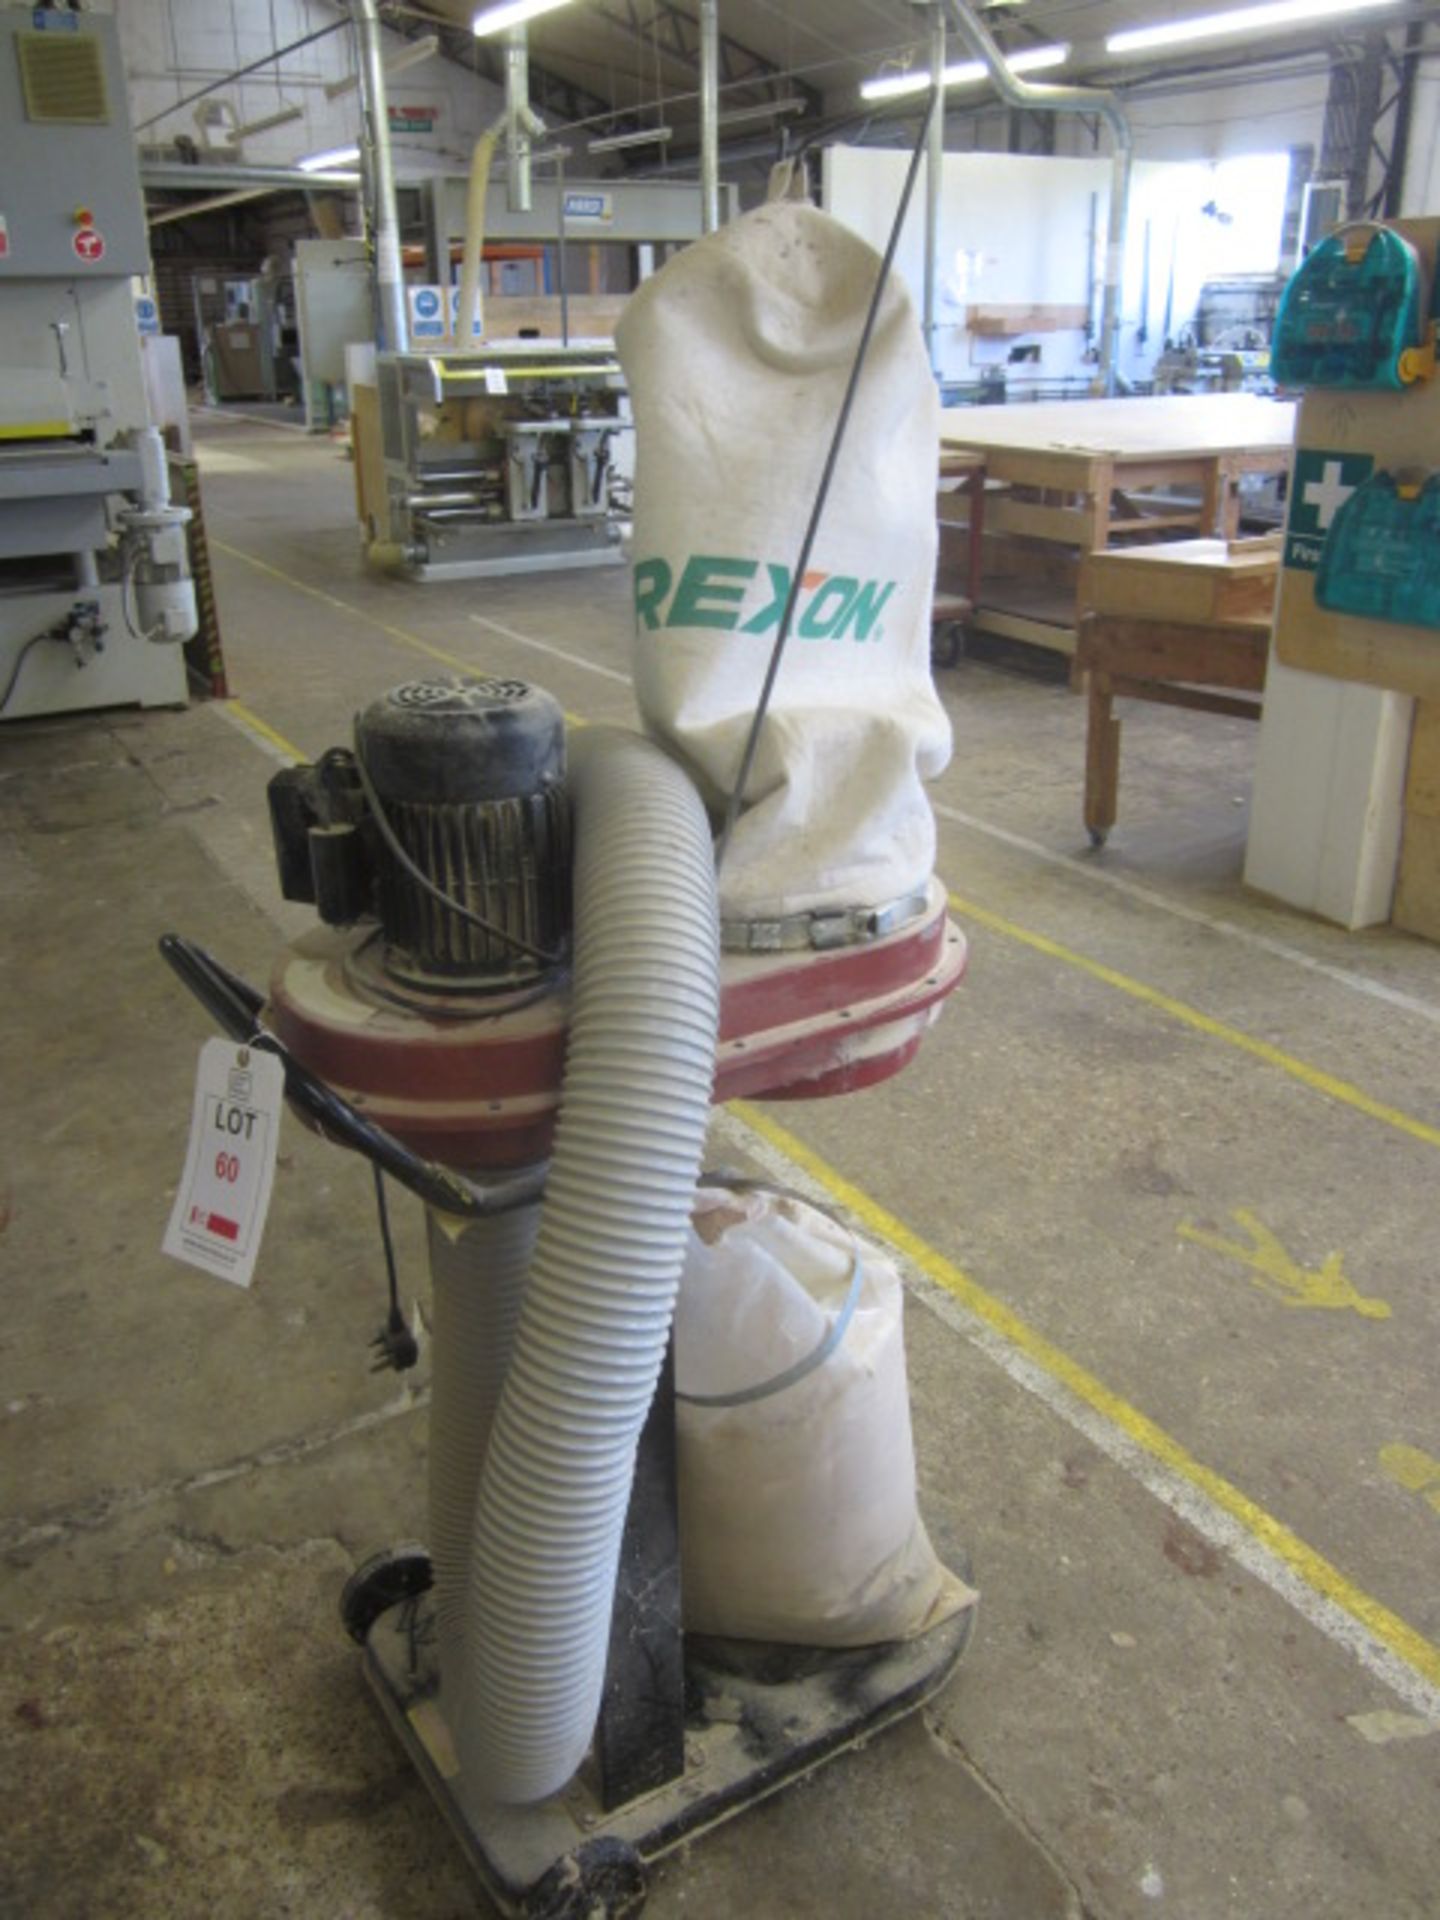 Rexon mobile single bag dust extractor, model DE-1000F, serial number 14607 - Image 2 of 4